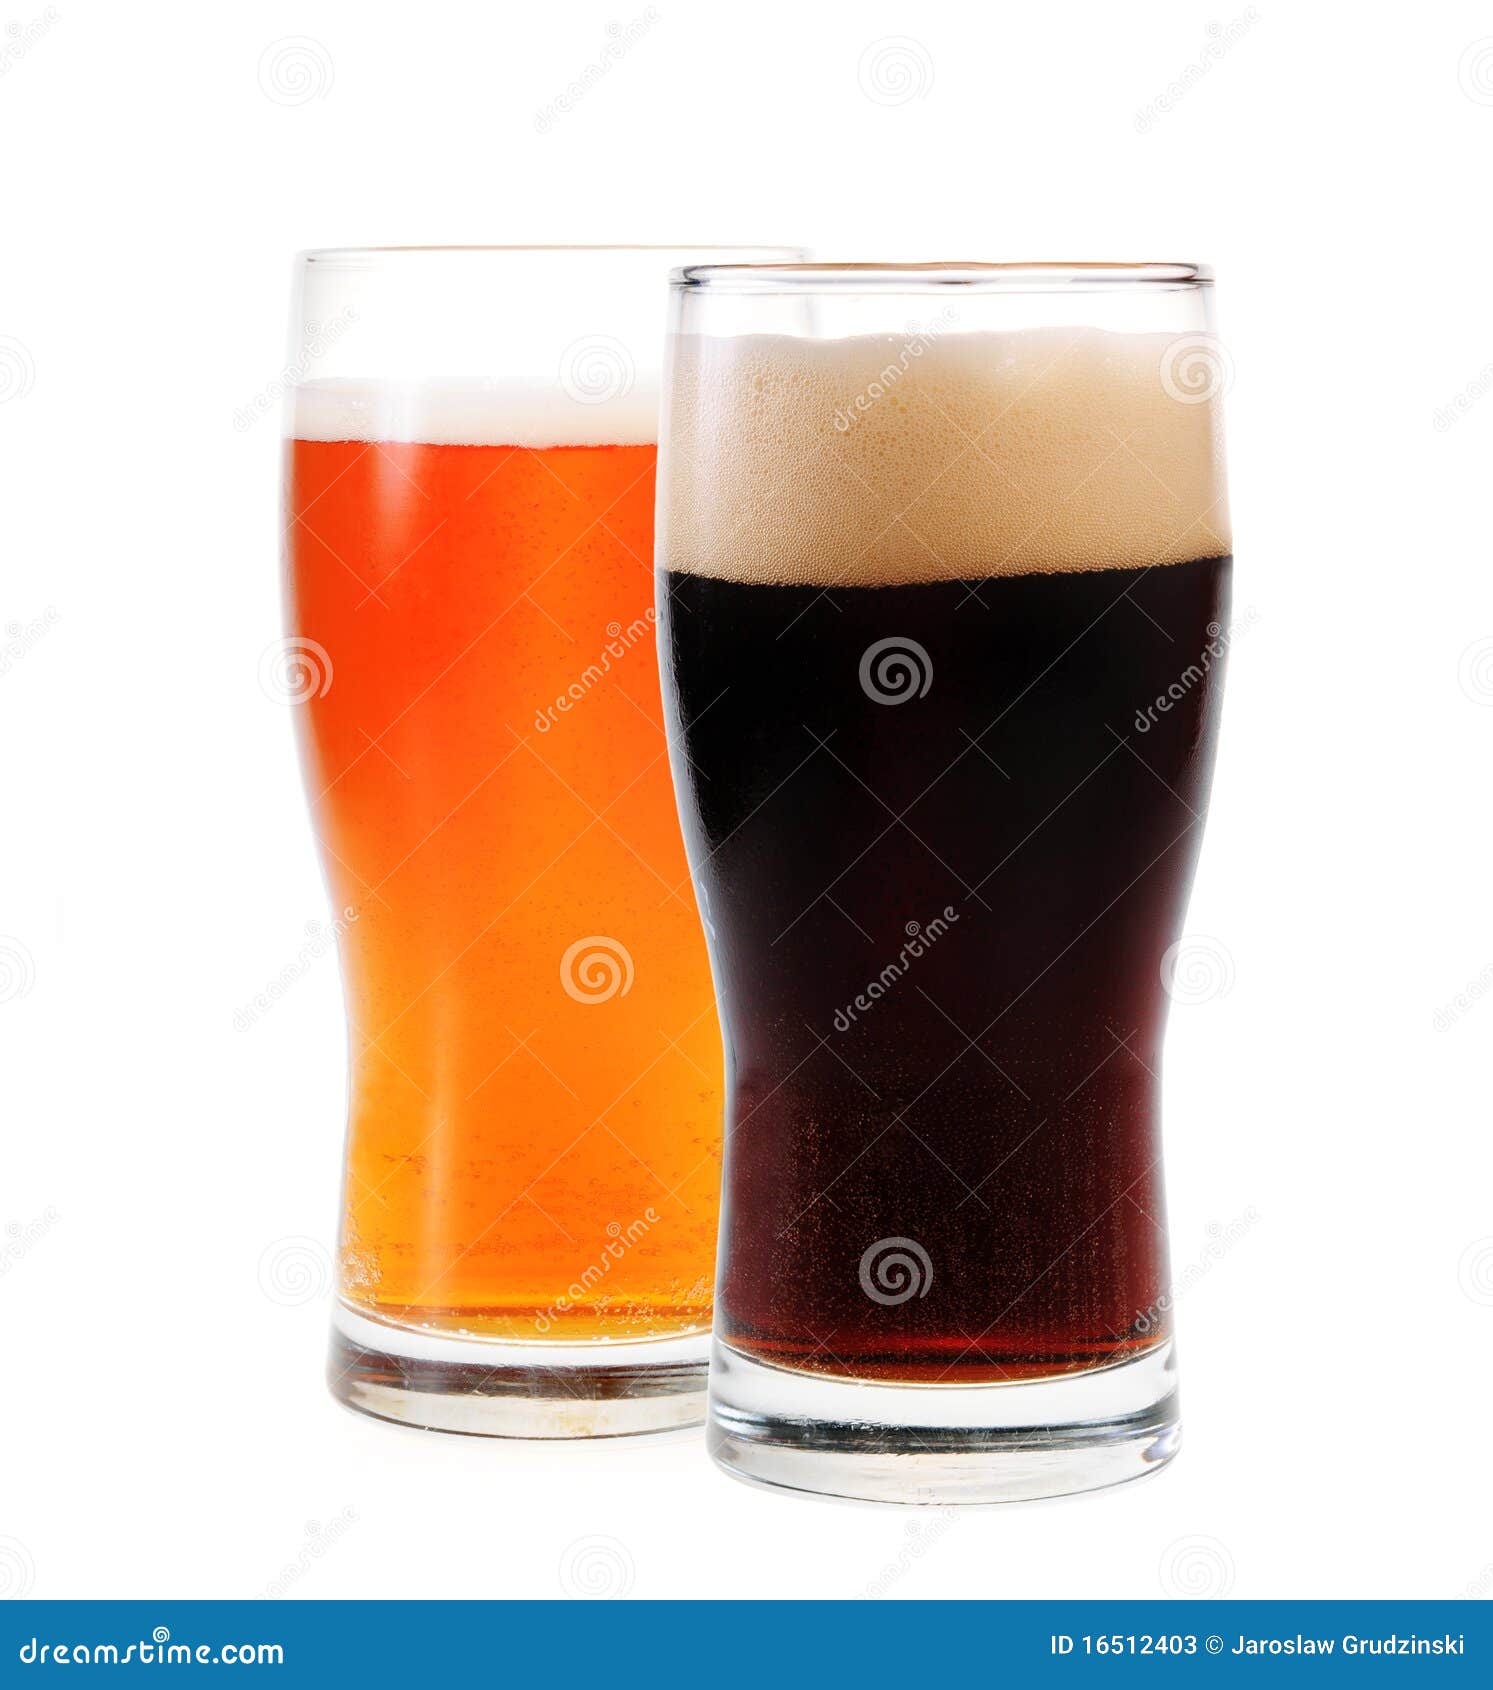 amber ale and stout